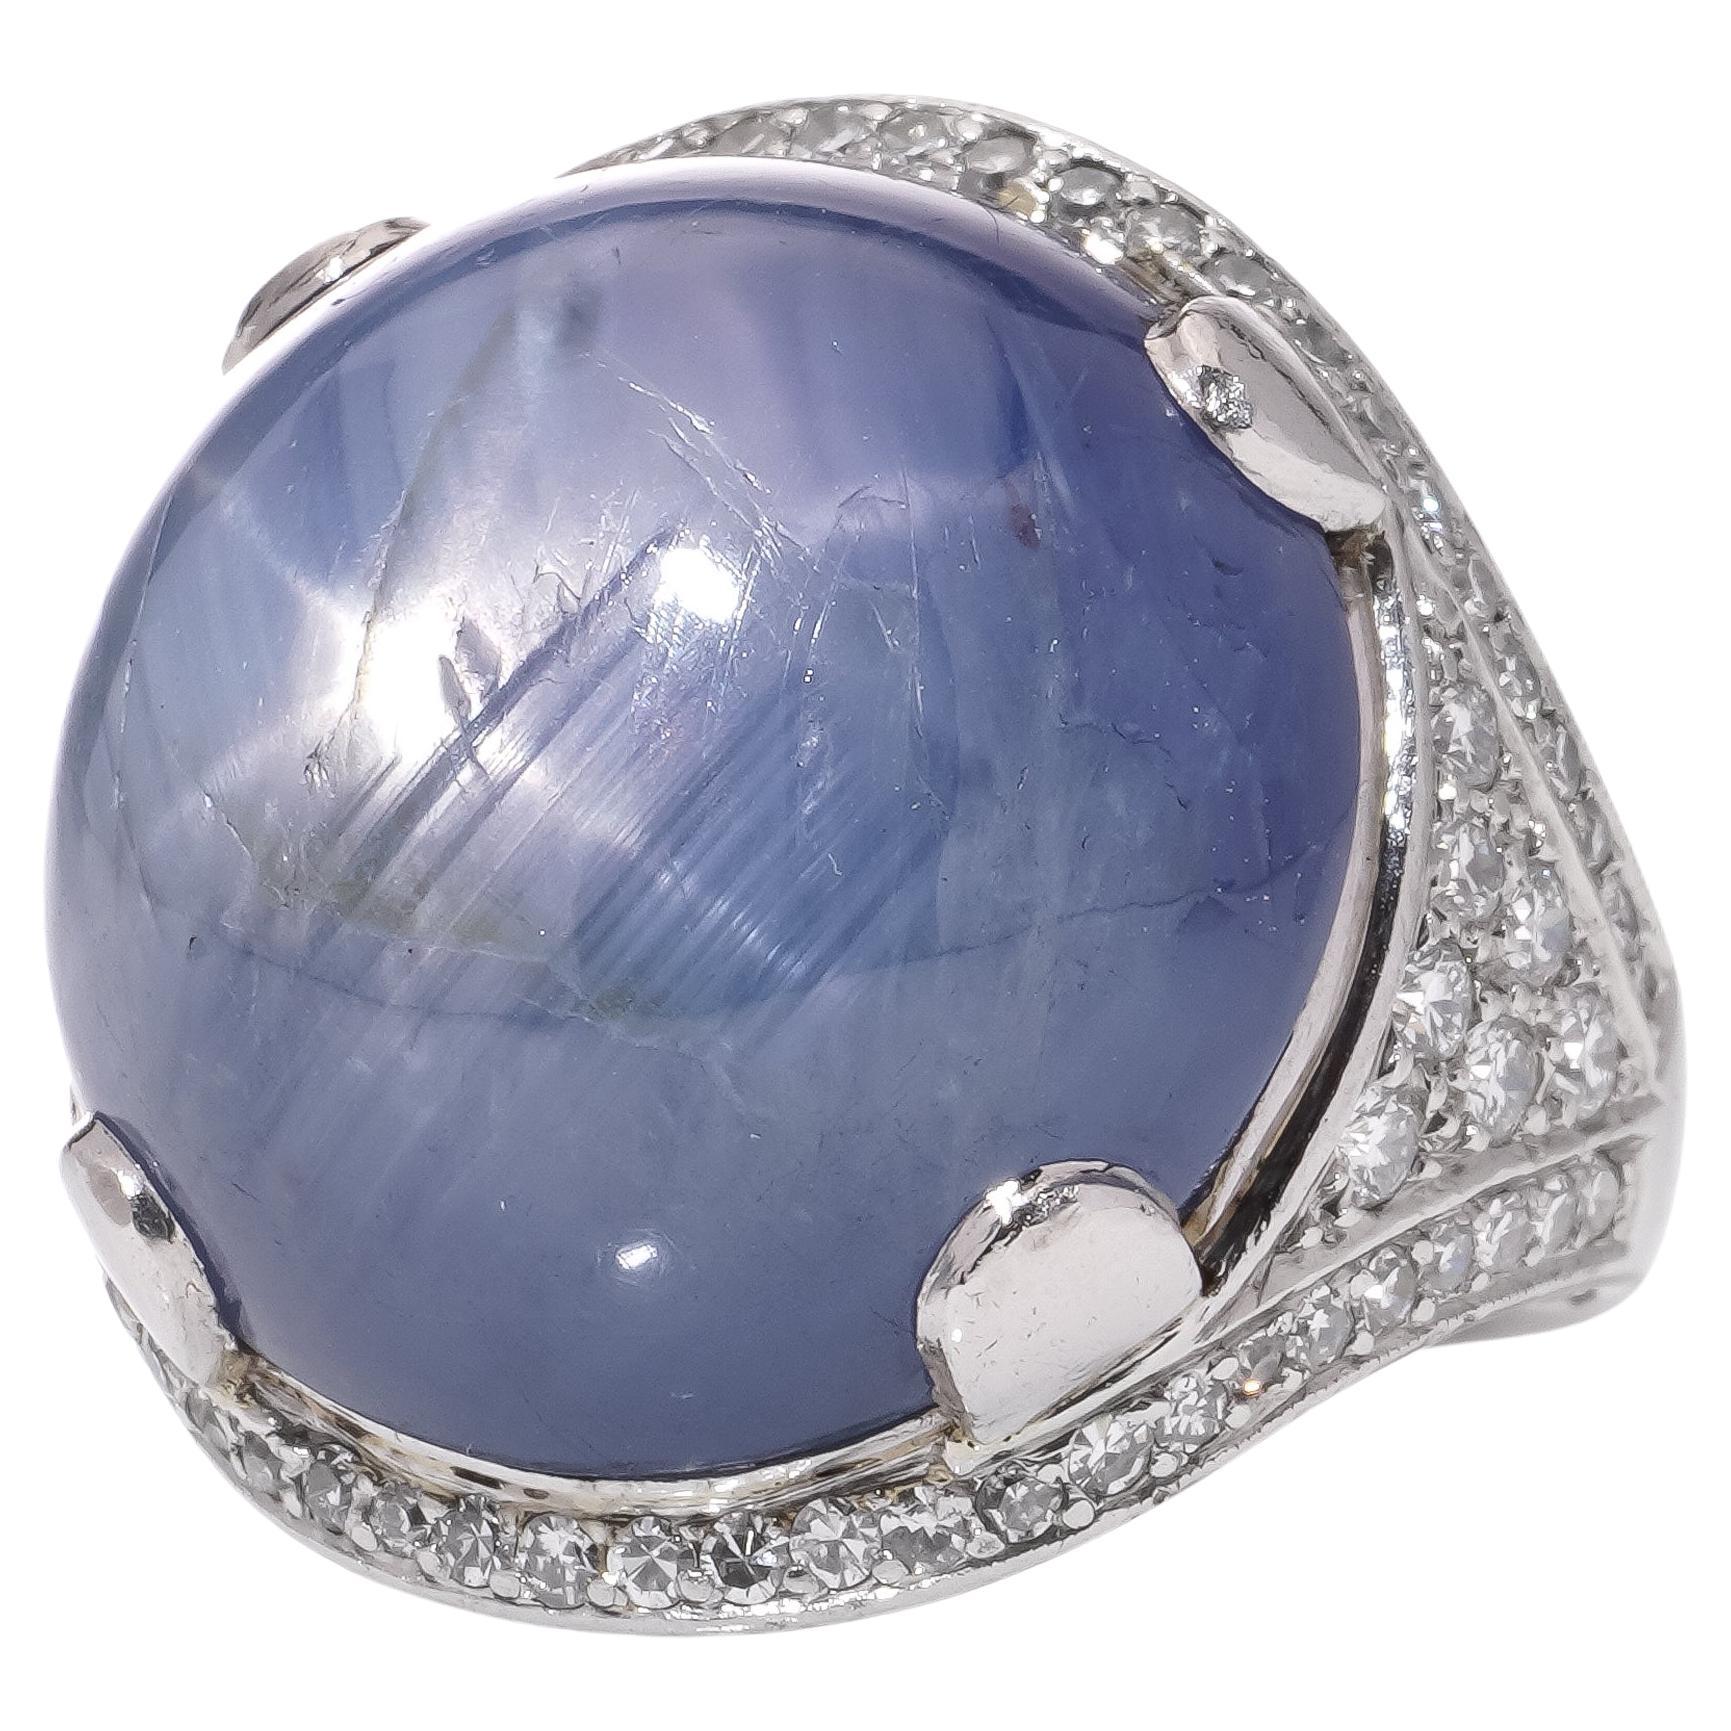 Platinum ladies' dome ring with 46 cts. of round natural cabochon sapphire